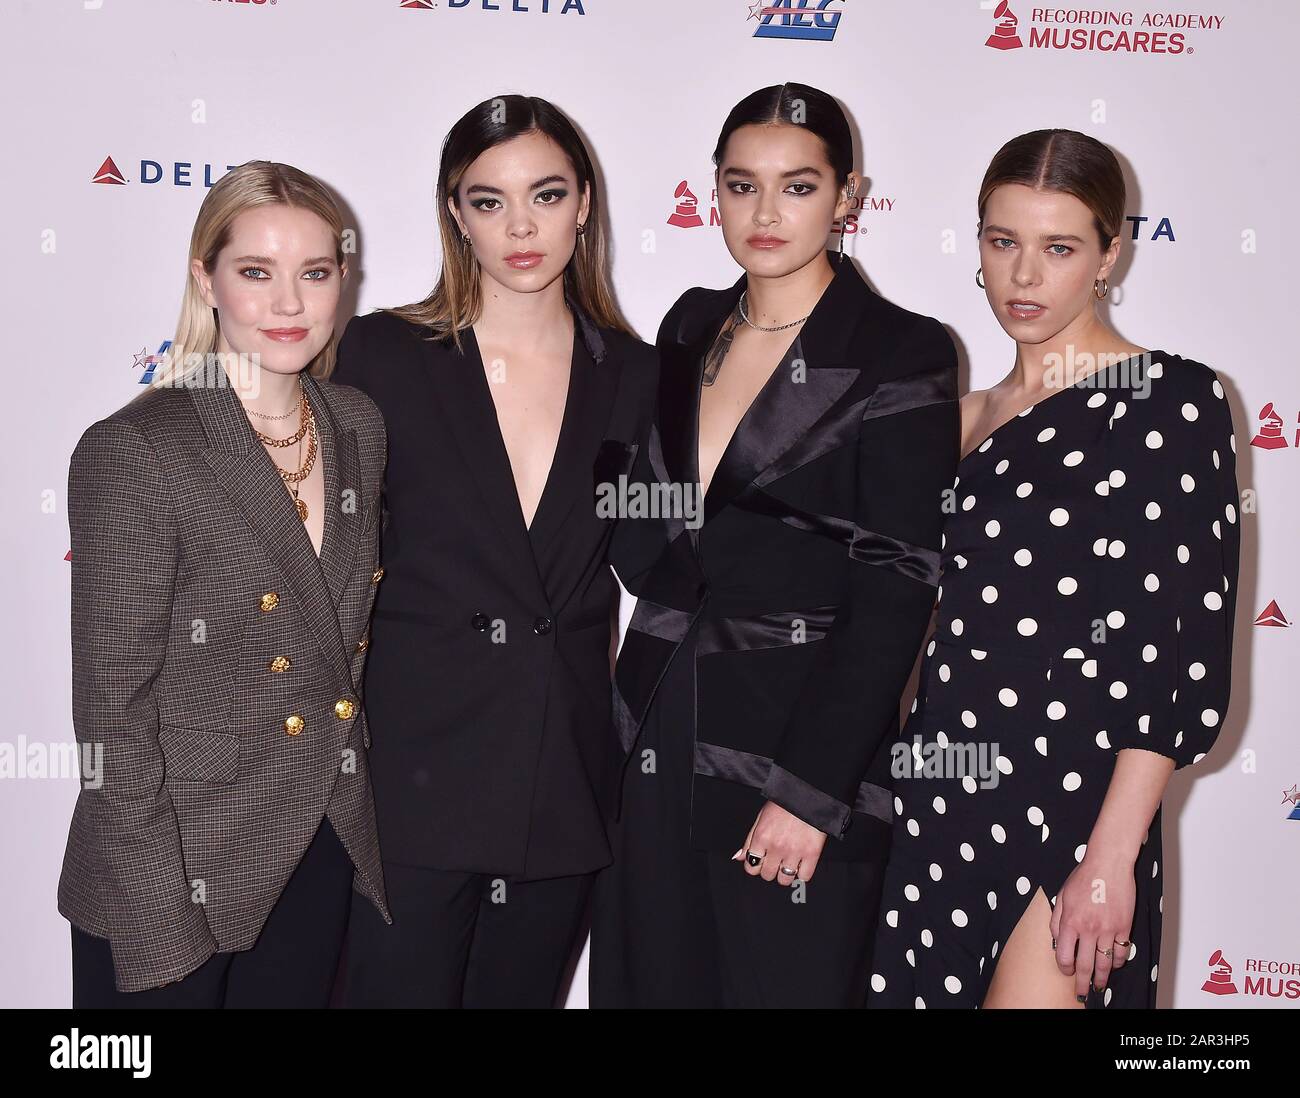 LOS ANGELES, CA - JANUARY 24: (L-R) Katie Henderson, Cristal Ramirez, Alisa  Ramirez and McKenna Petty of The Aces attend the 2020 MusiCares Person Of  The Year Honoring Aerosmith at West Hall